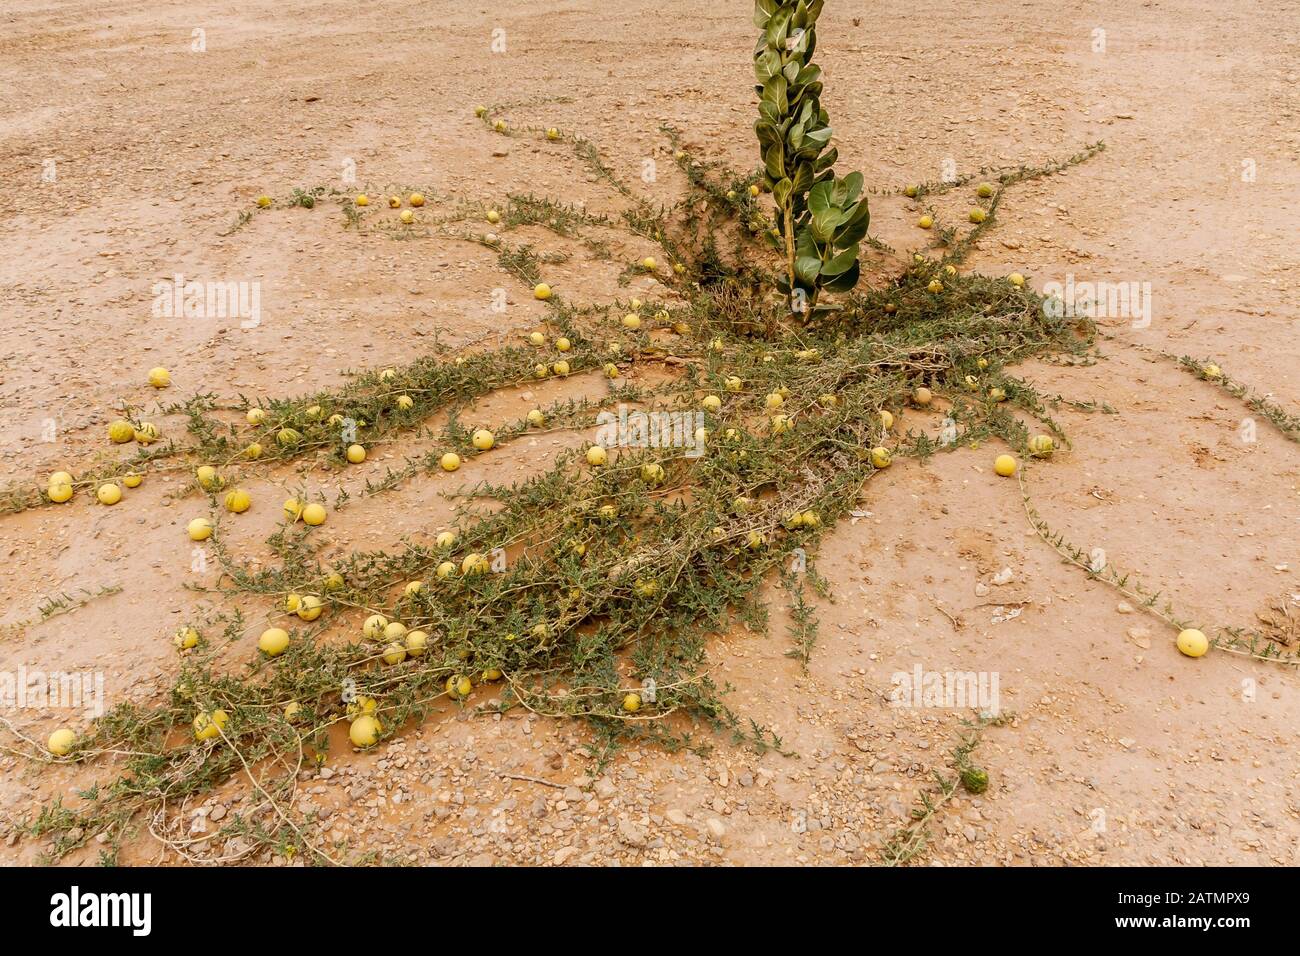 Wild desert gourd or colocynth (Citrullus colocynthis) Stock Photo